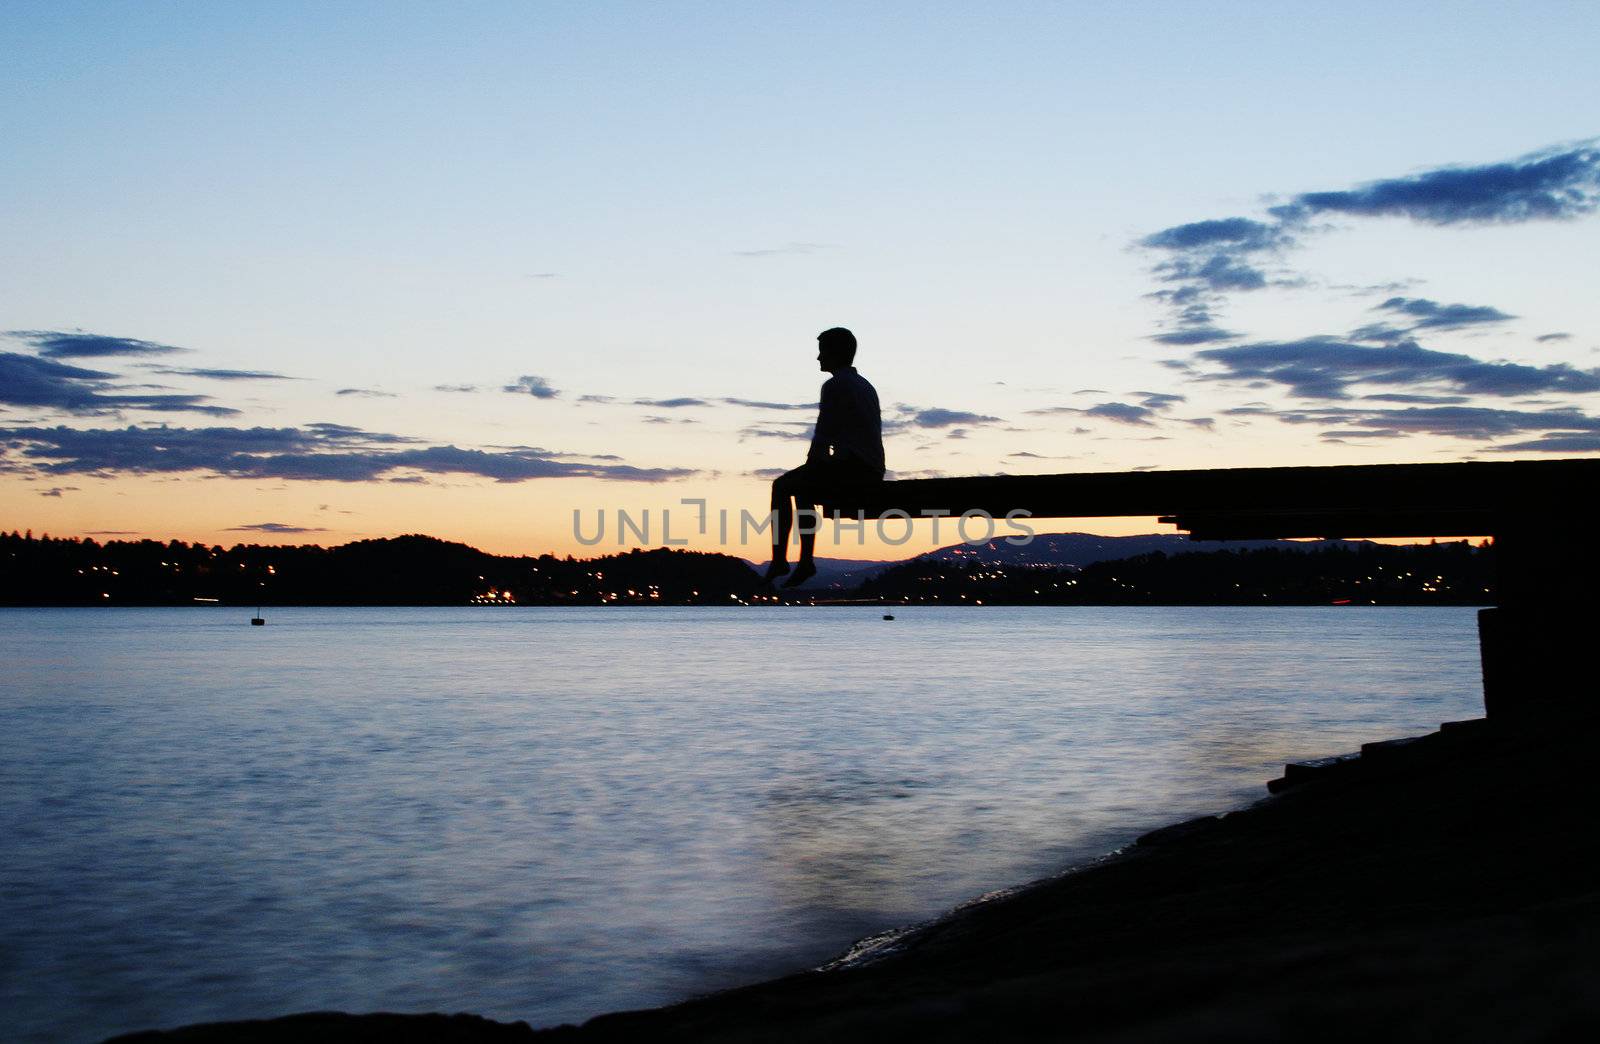 A young person sitting on a dock at dusk, at the fjord in Oslo, Norway